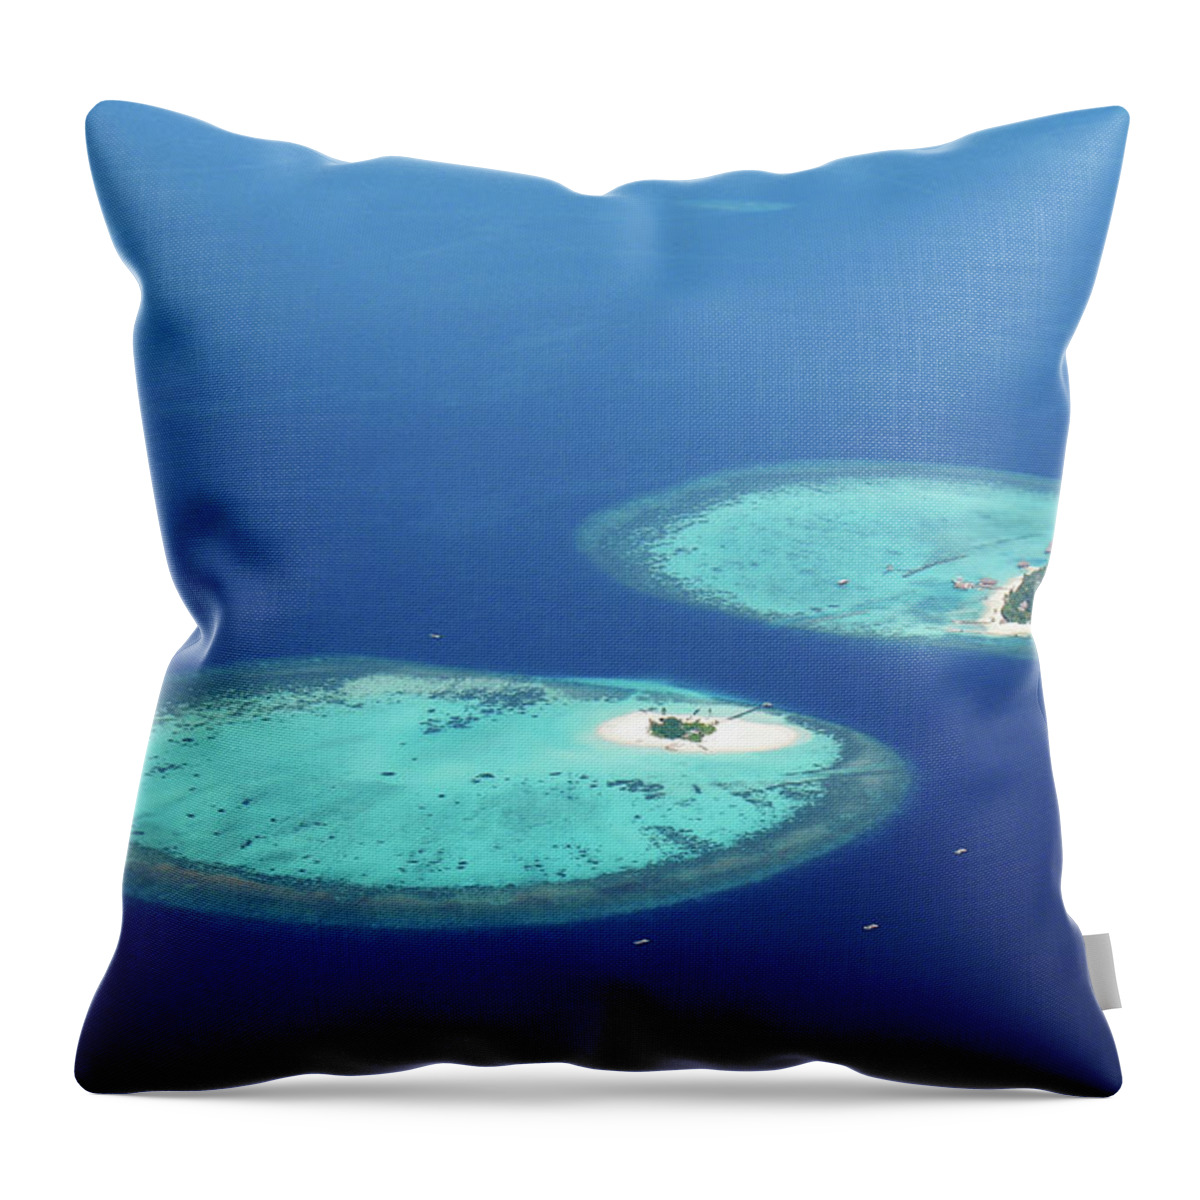 Outdoors Throw Pillow featuring the photograph Twin Island Resort by Mohamed Abdulla Shafeeg